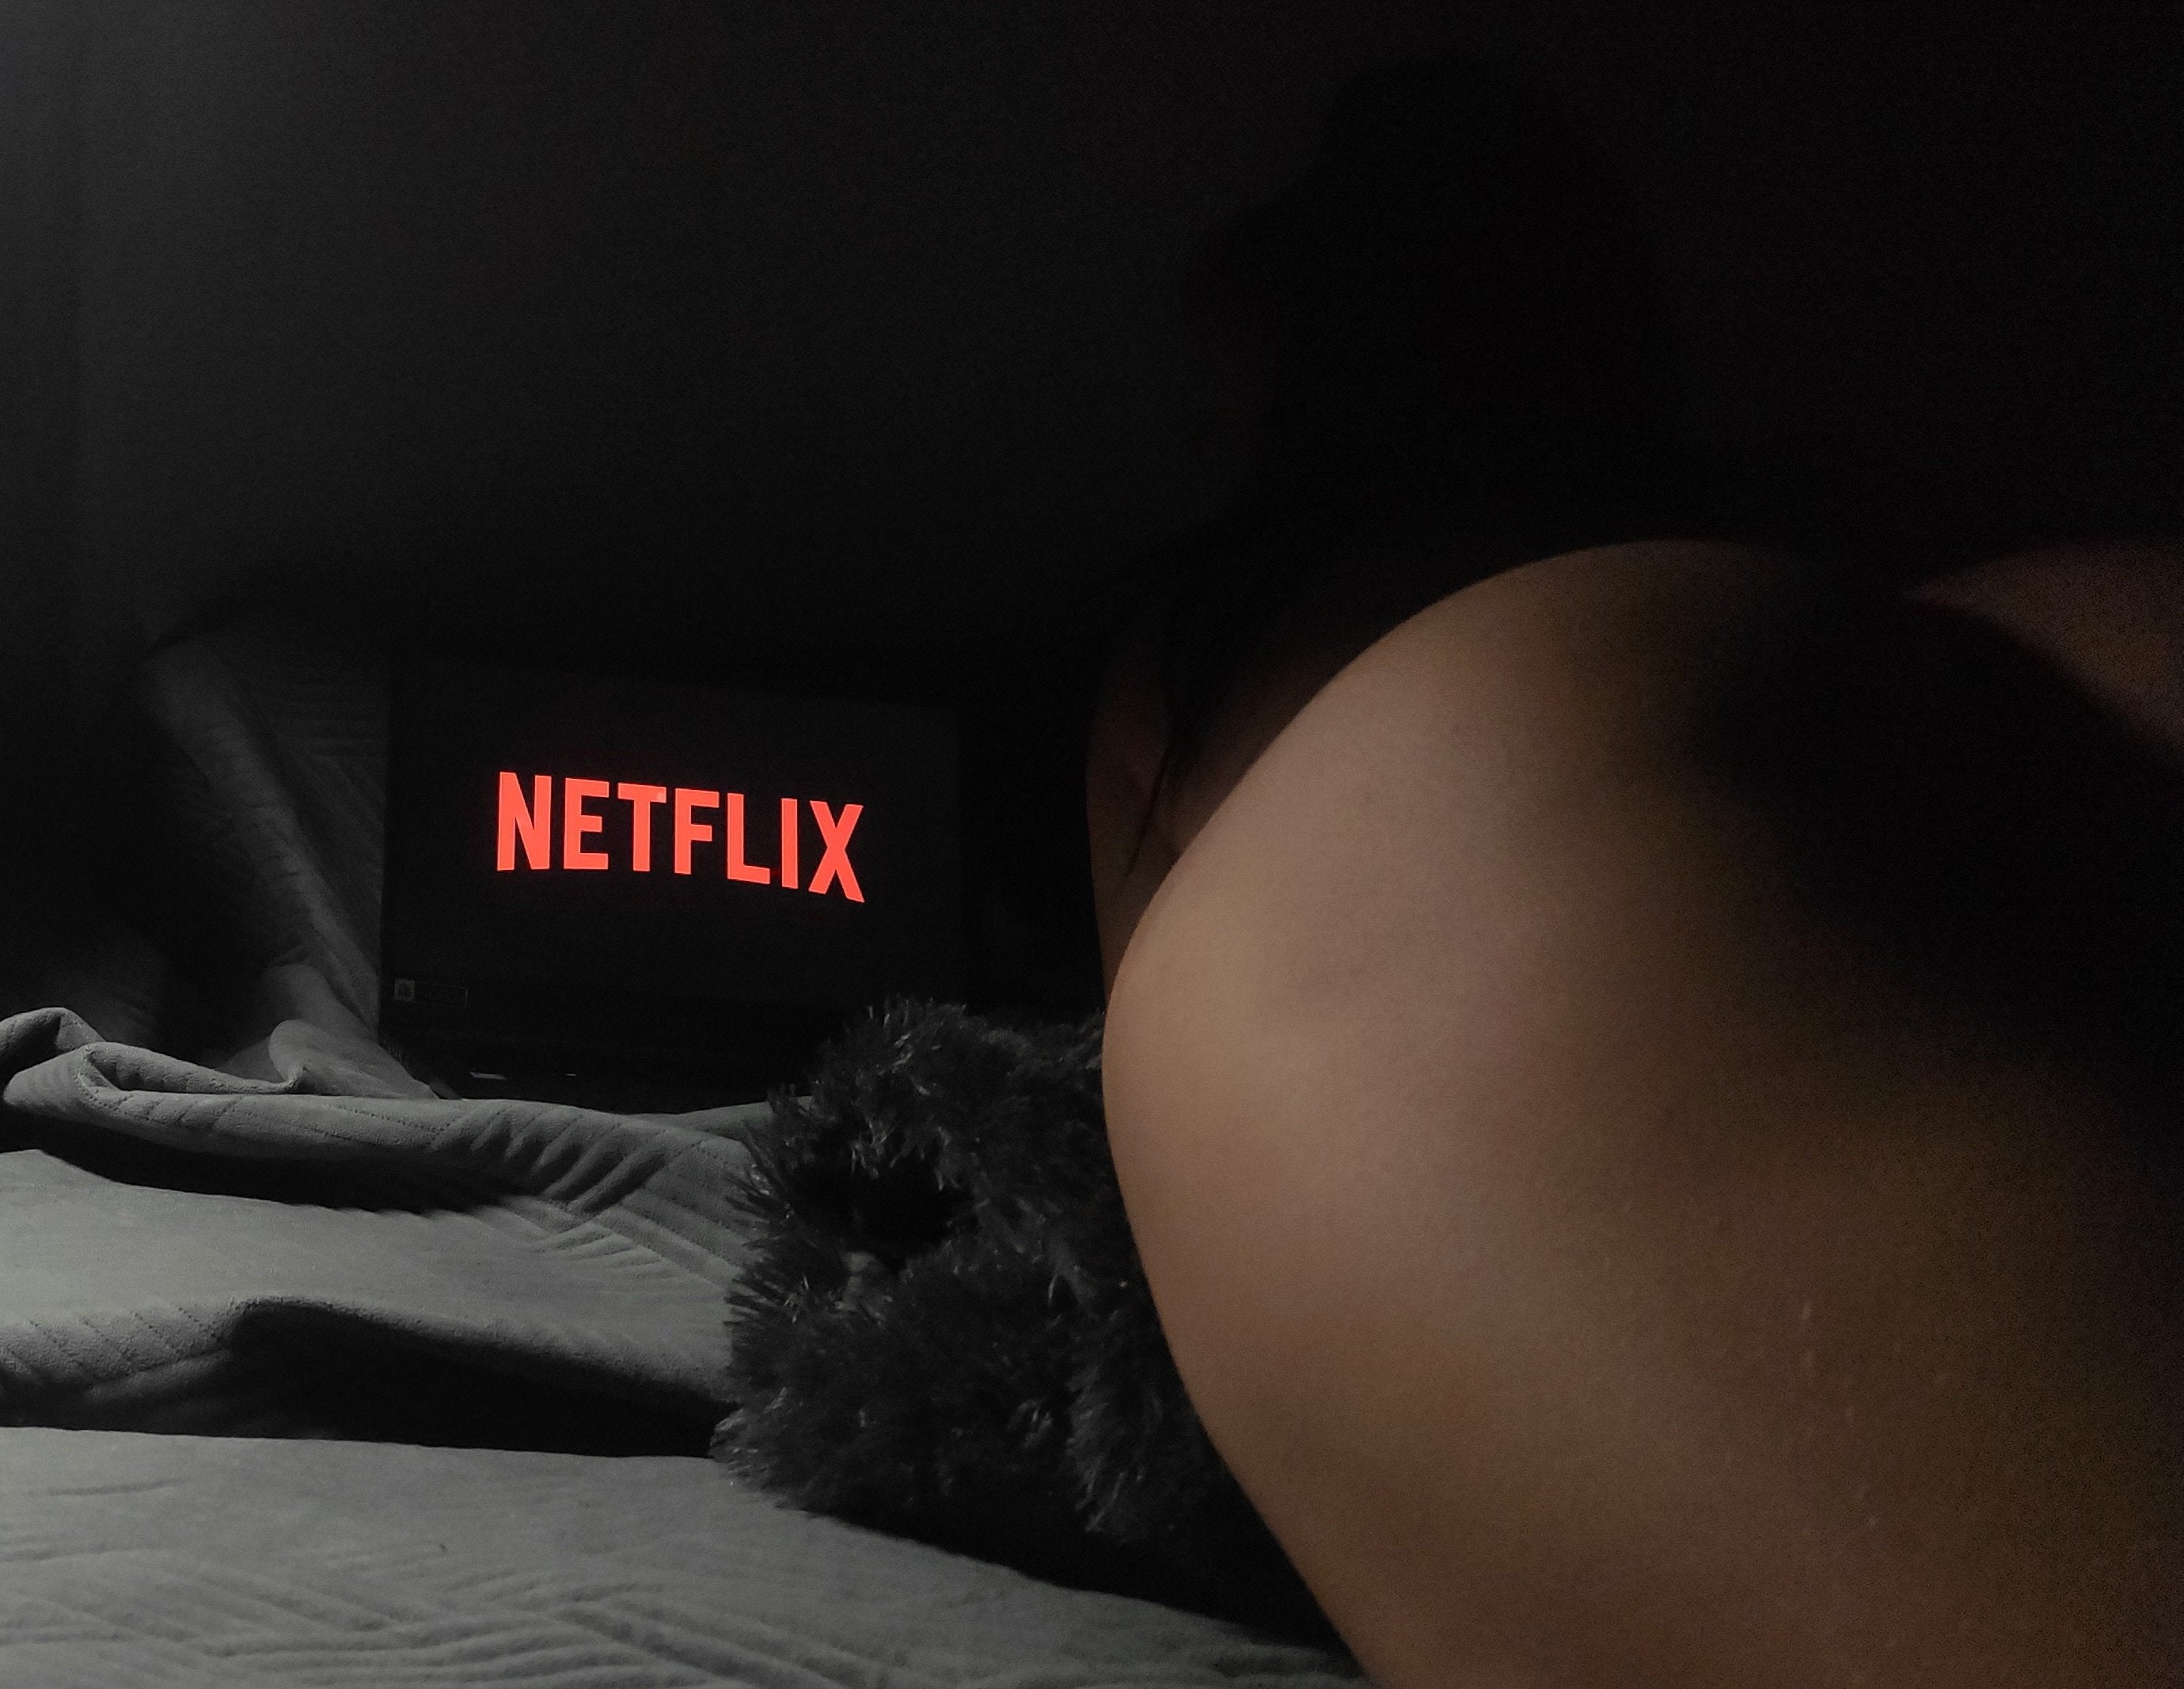 Any good Netflix suggestions Thick White Girls